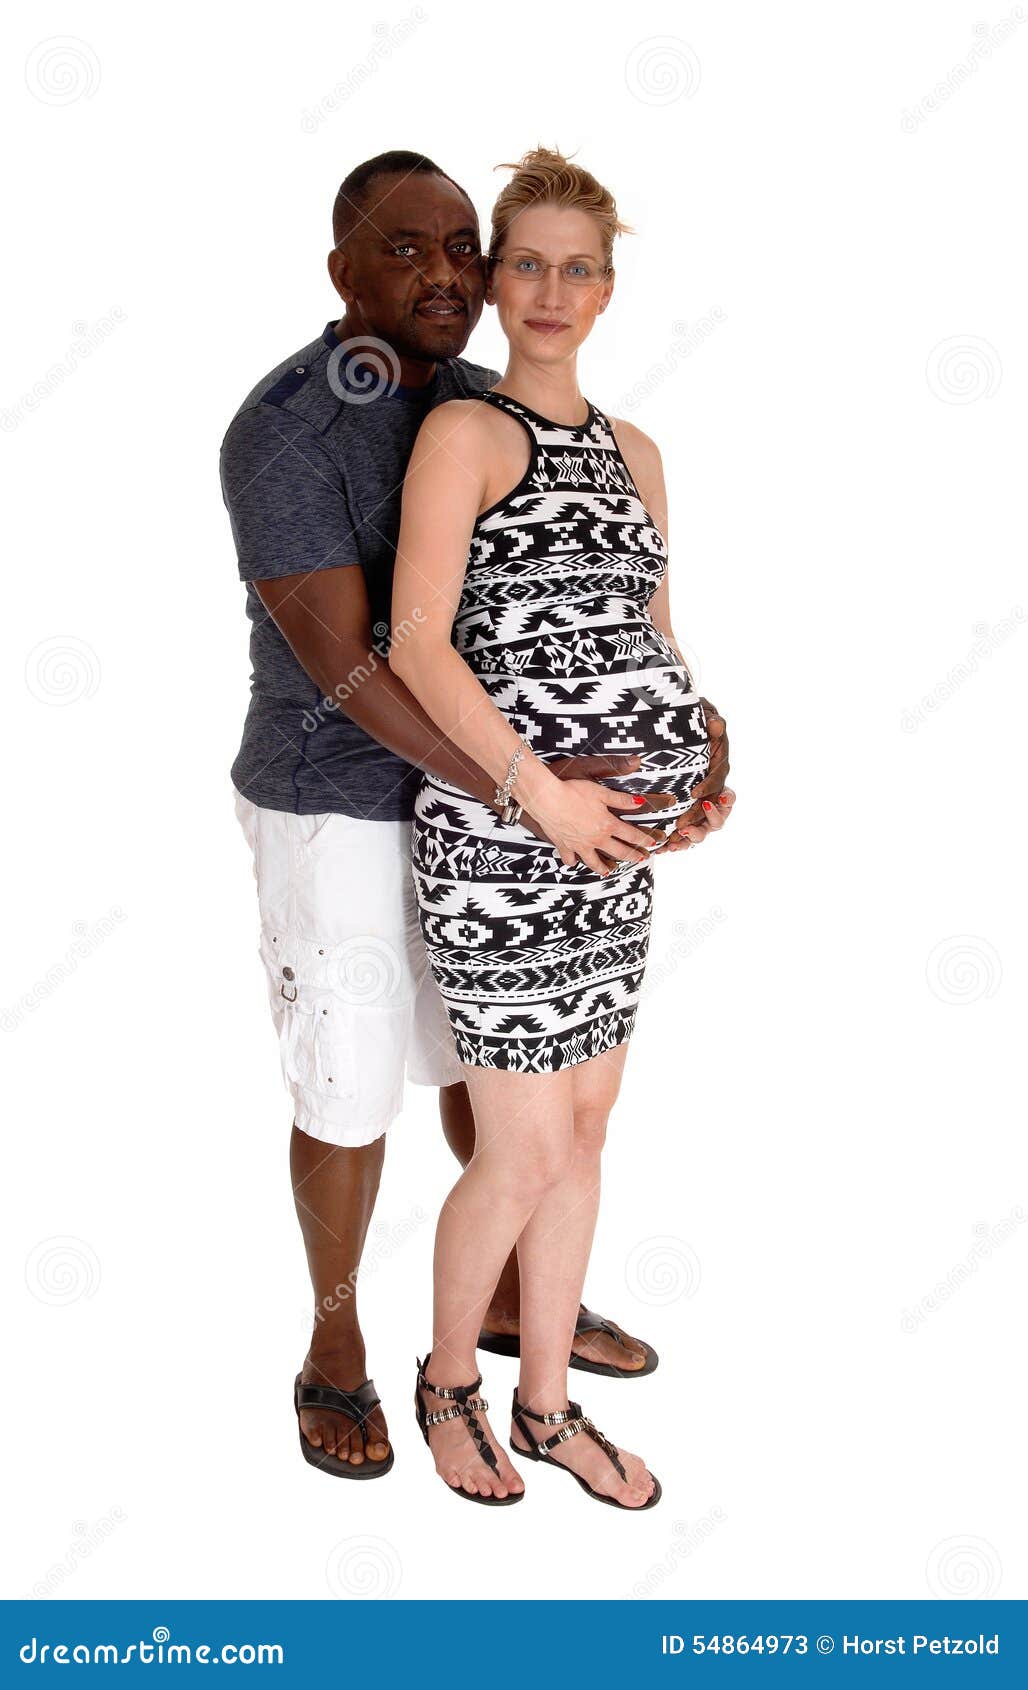 Black guy and white girl making mixed babies porn 963 White Woman Pregnant Black Man Photos Free Royalty Free Stock Photos From Dreamstime